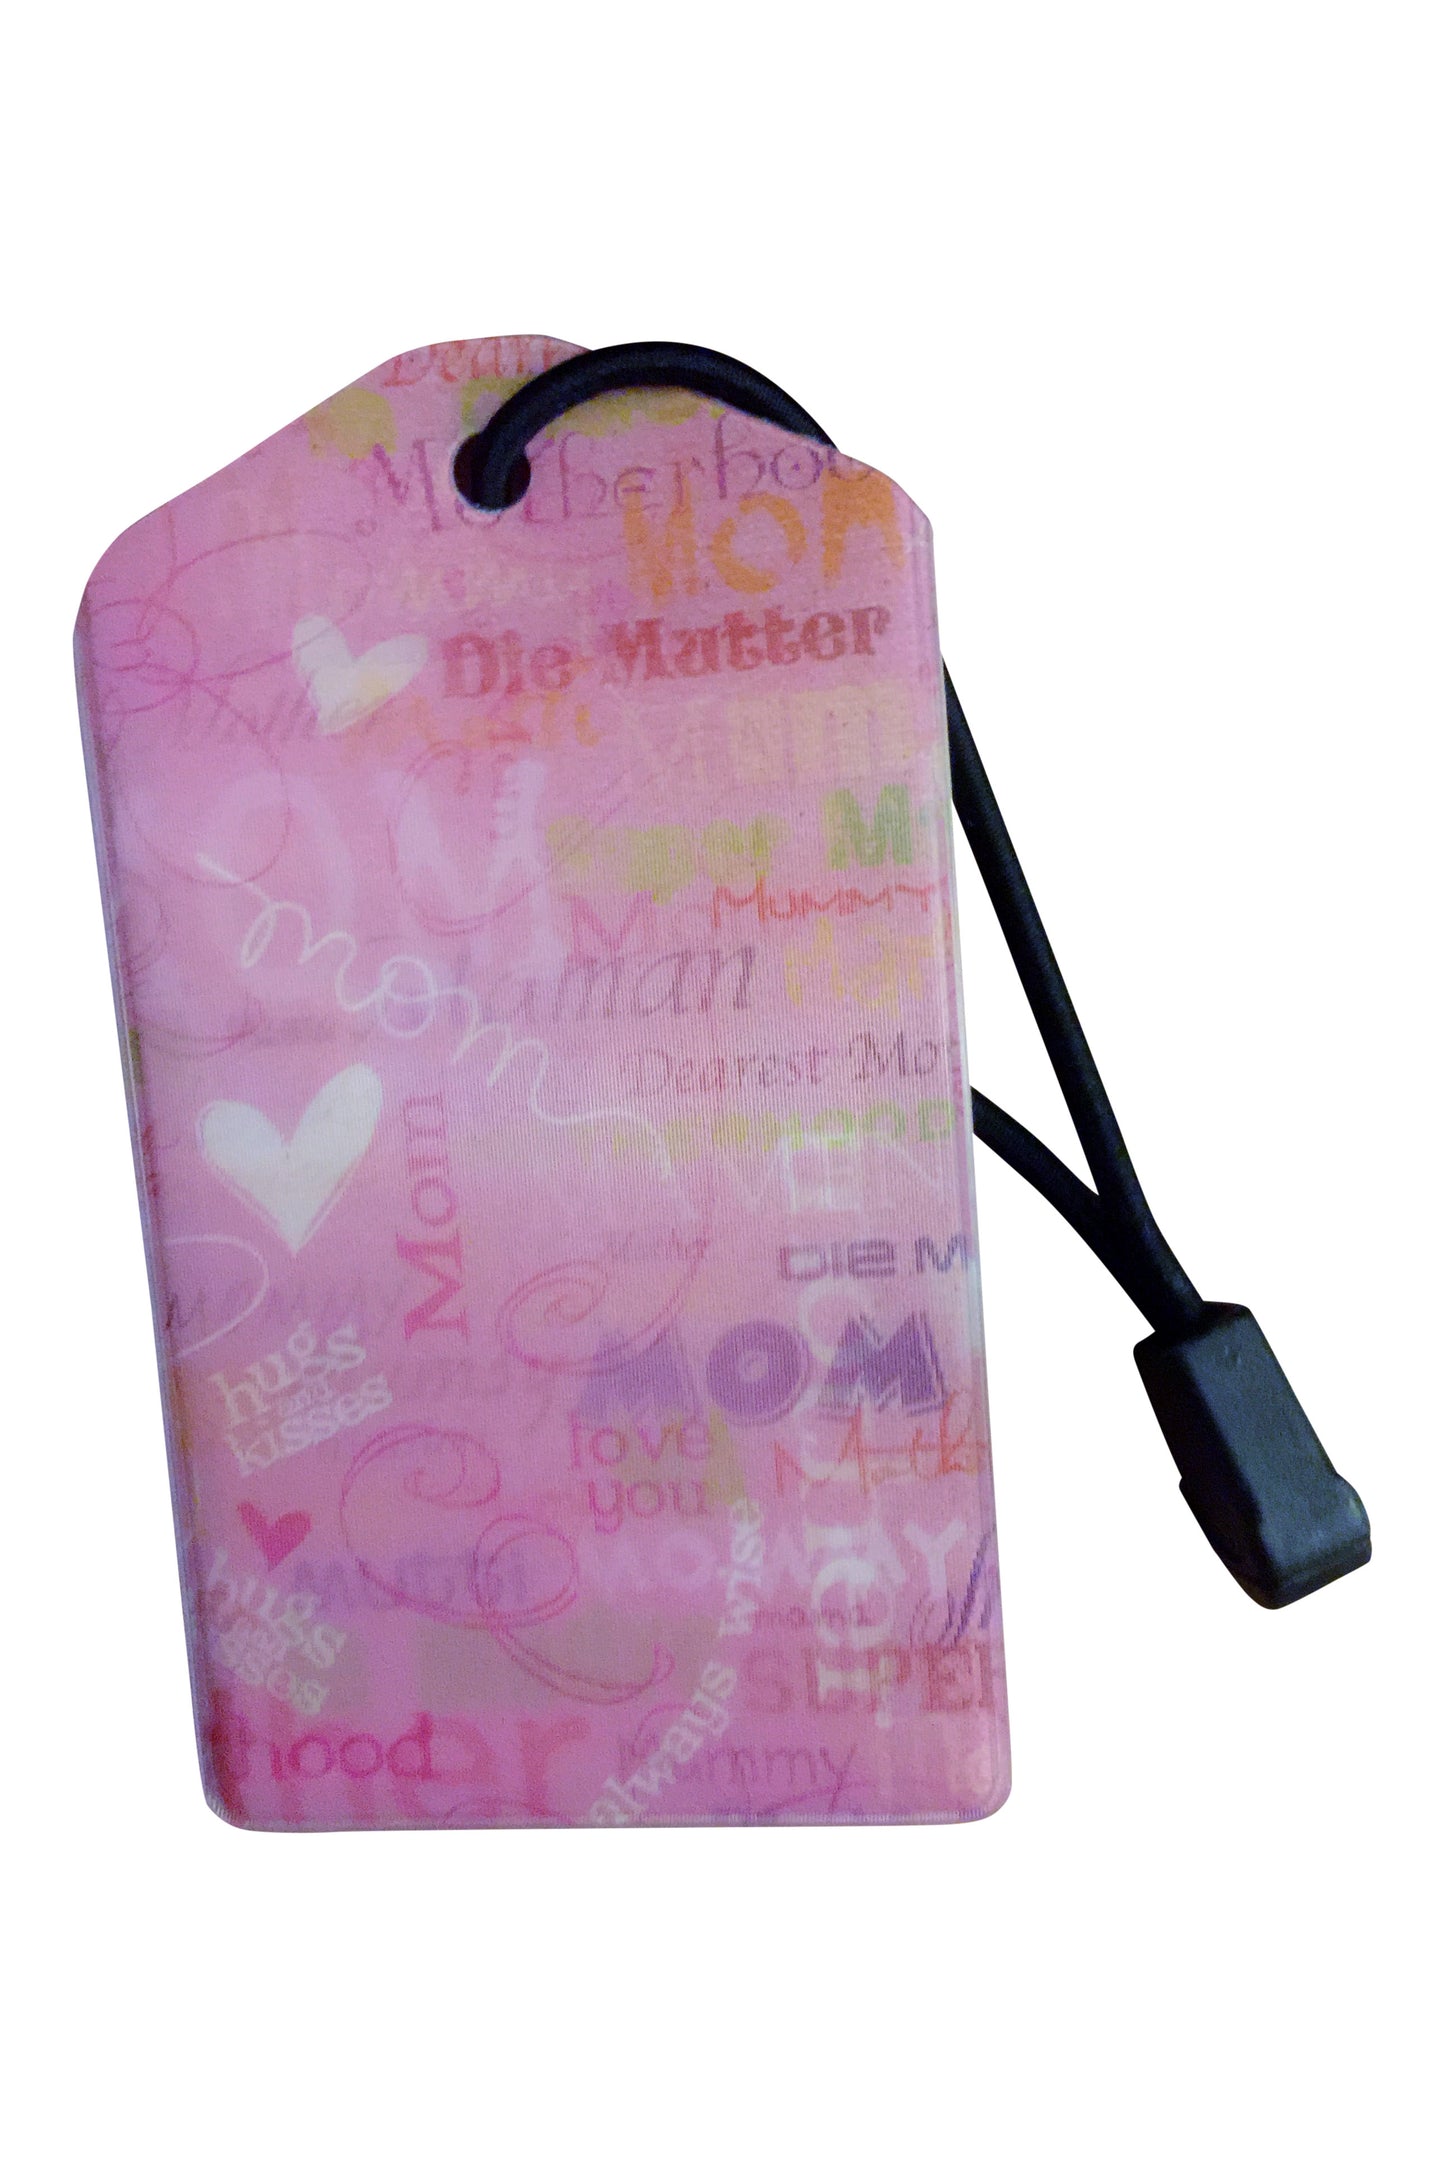 z Luggage Tag: Mom - En Route Travelware 